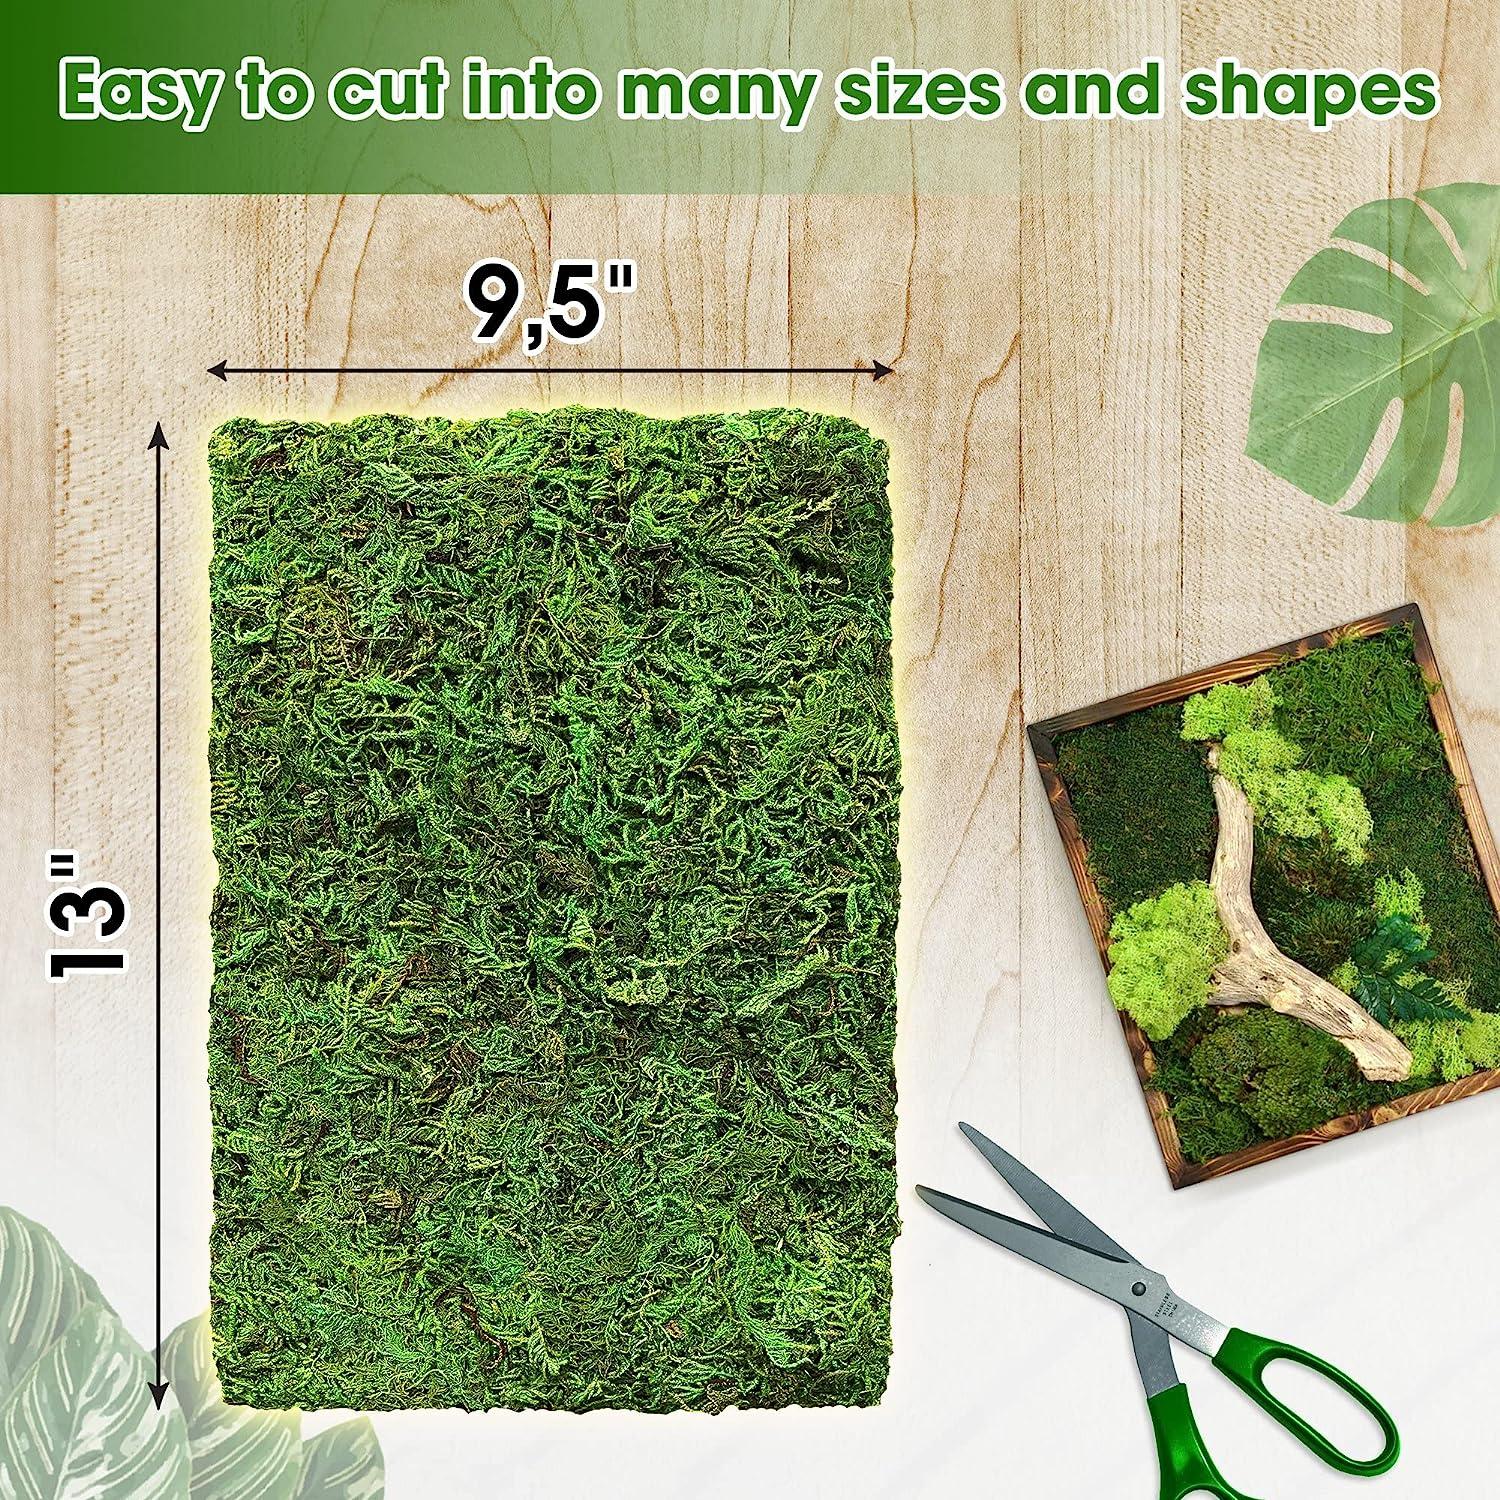 DUSPRO Green Moss for Crafts, Artificial Moss Potted Plants, Decorative Moss for Table Centerpieces Wedding Christmas Fairy Party Decor, Faux Moss